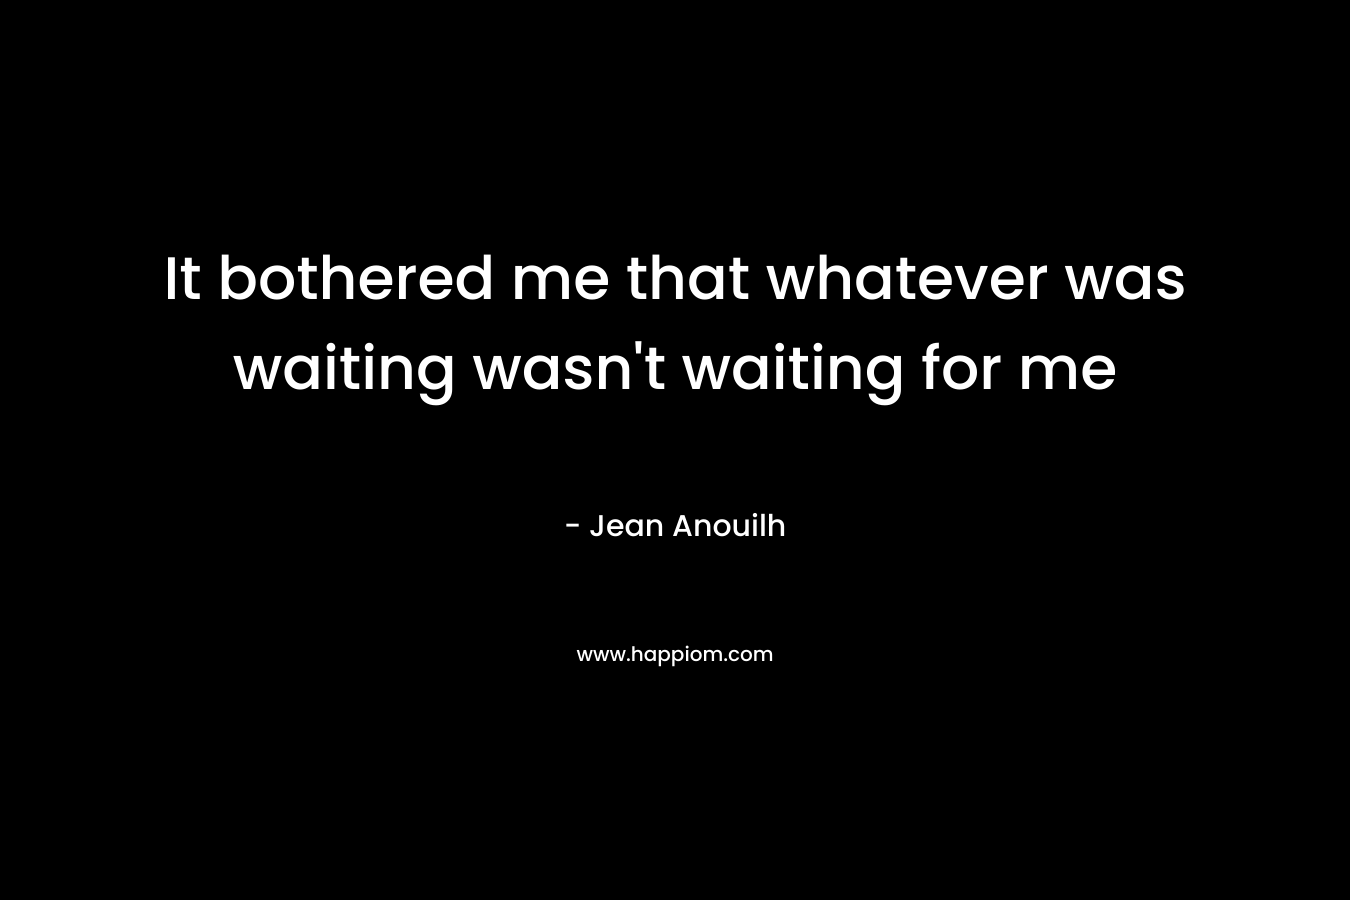 It bothered me that whatever was waiting wasn’t waiting for me – Jean Anouilh